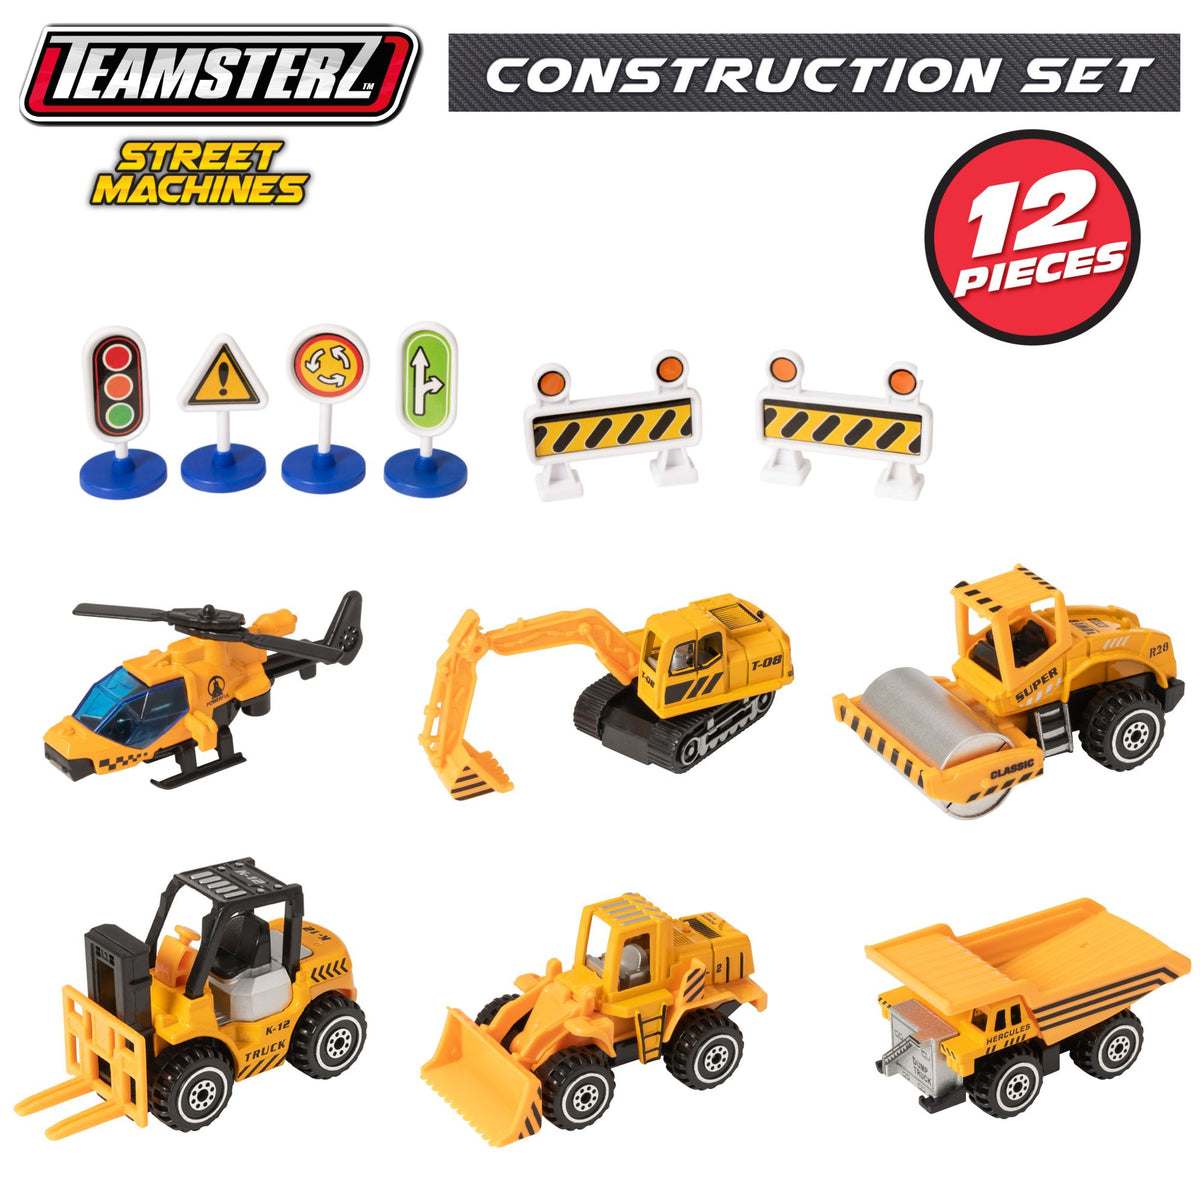 Teamsterz Street Machines Construction Playset | 12 Piece Construction Playset